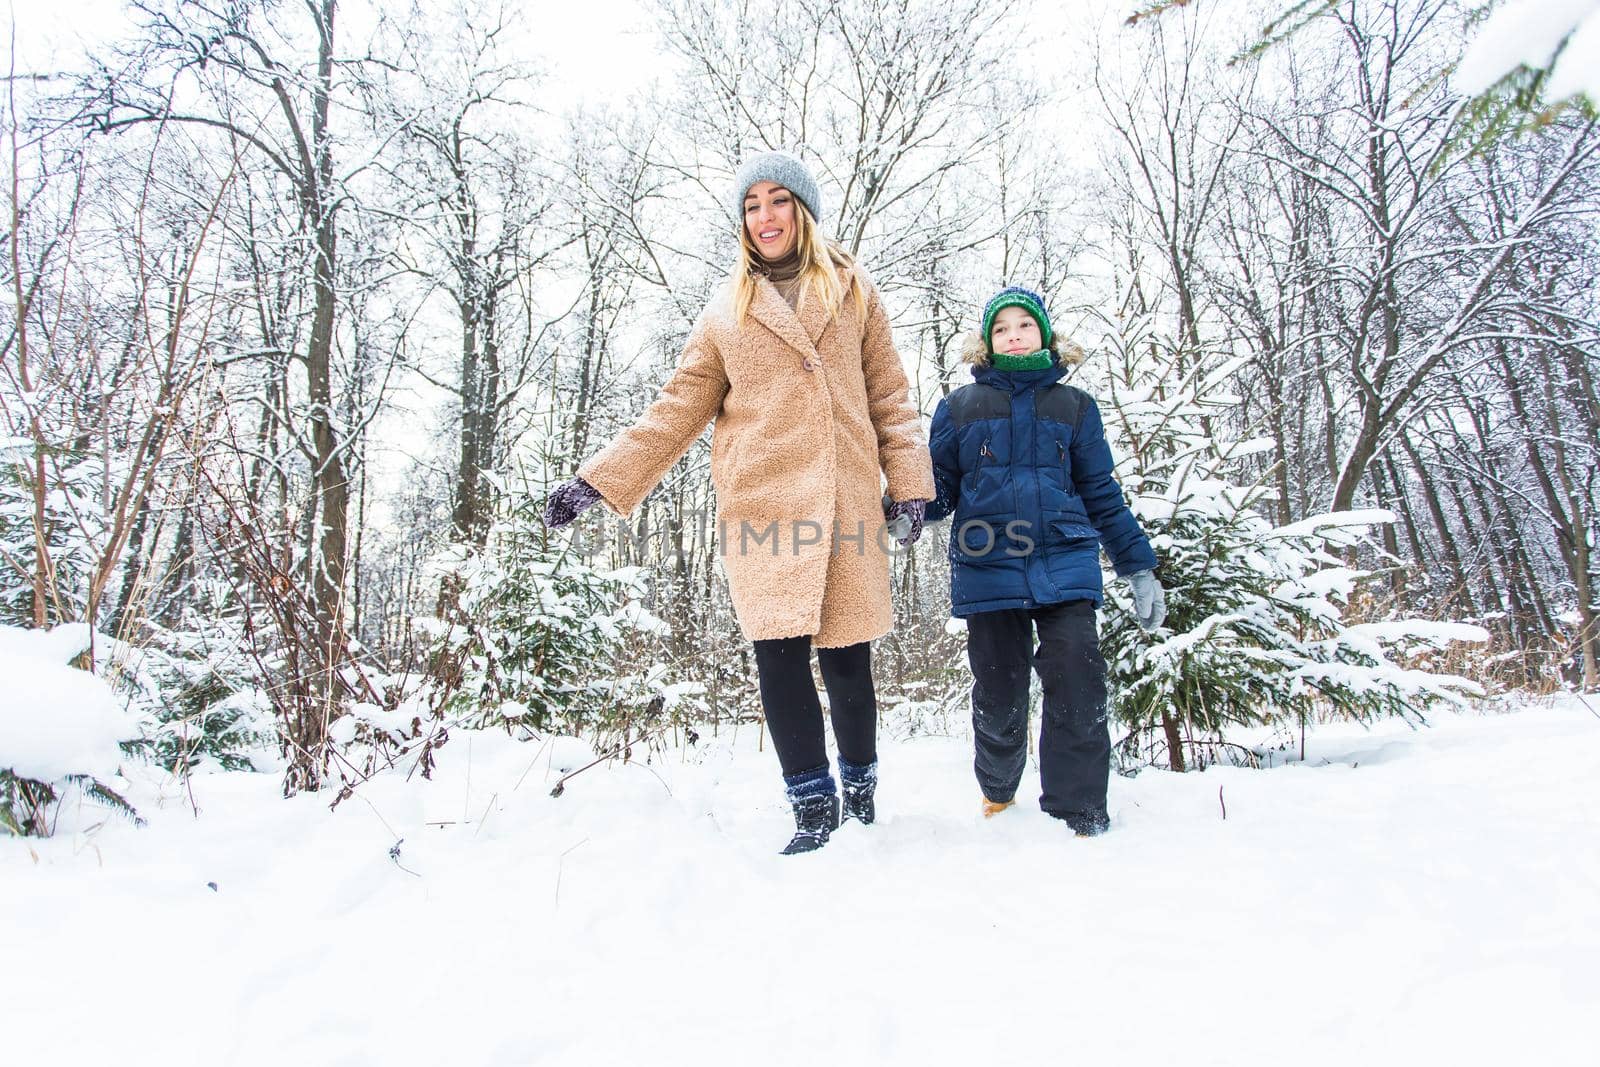 Parenting, fun and season concept - Happy mother and son having fun and playing with snow in winter forest by Satura86